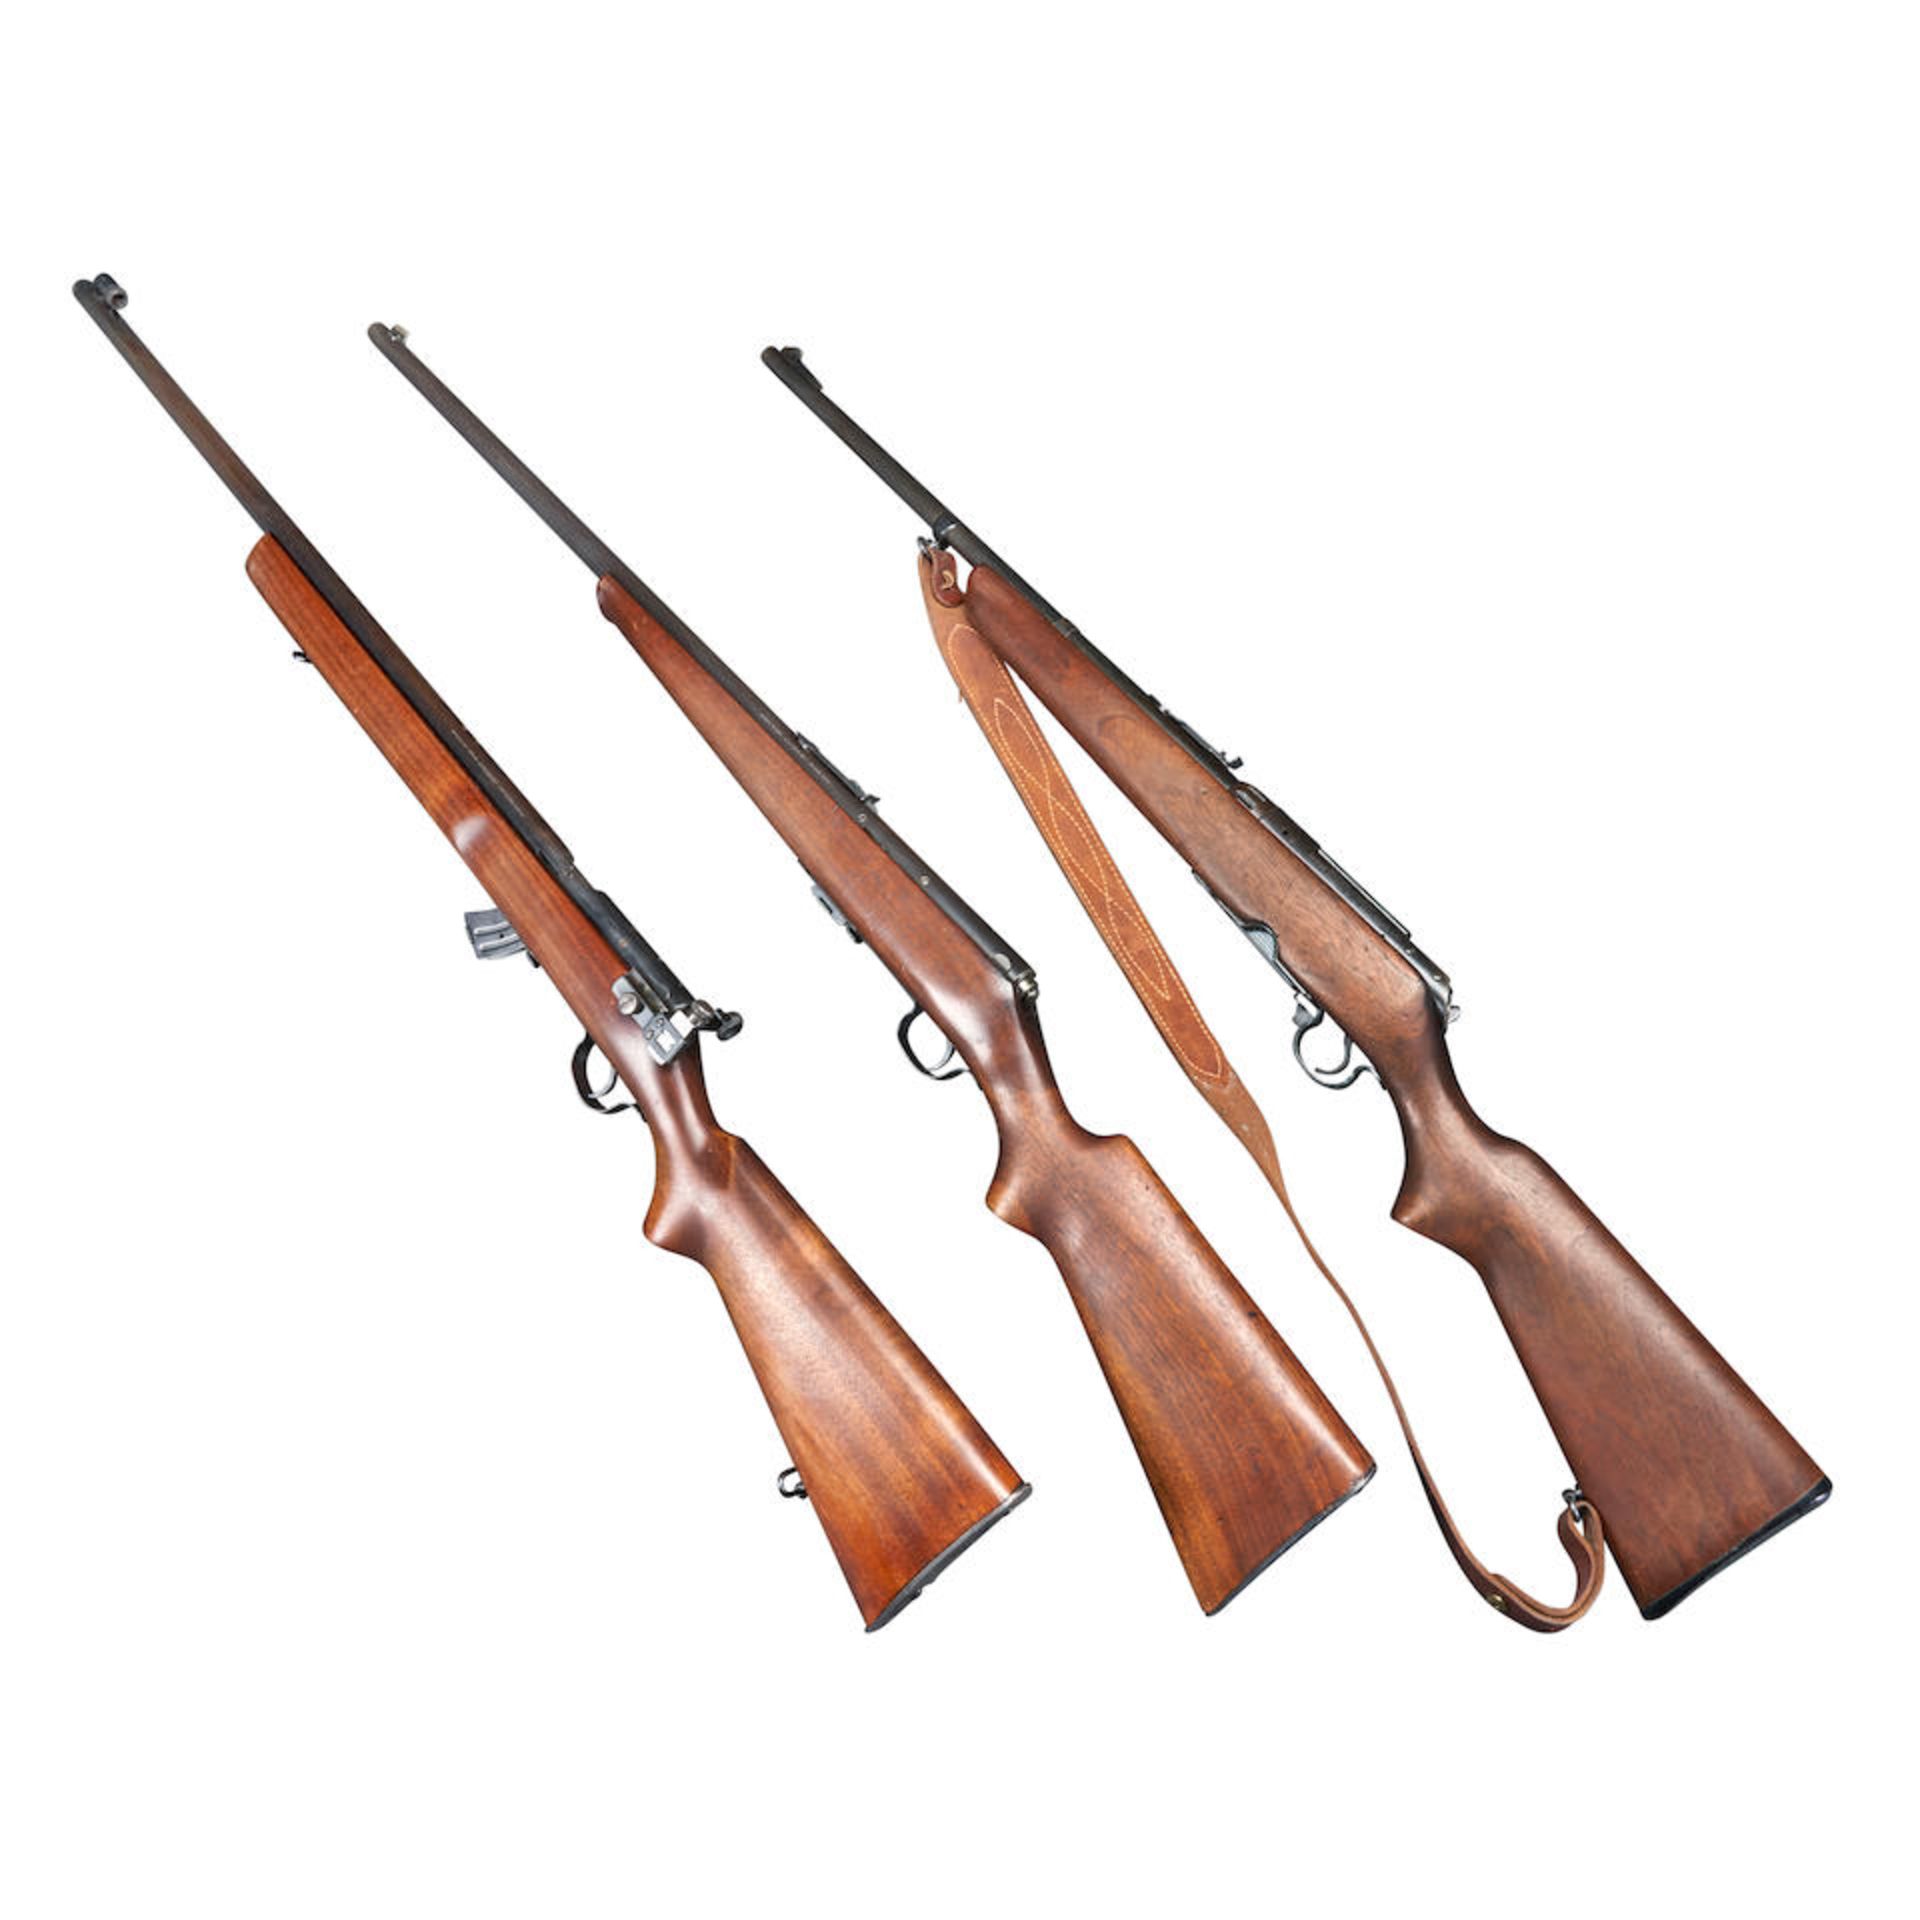 Three Savage Bolt Action Rifles. Curio or Relic firearm - Image 2 of 2